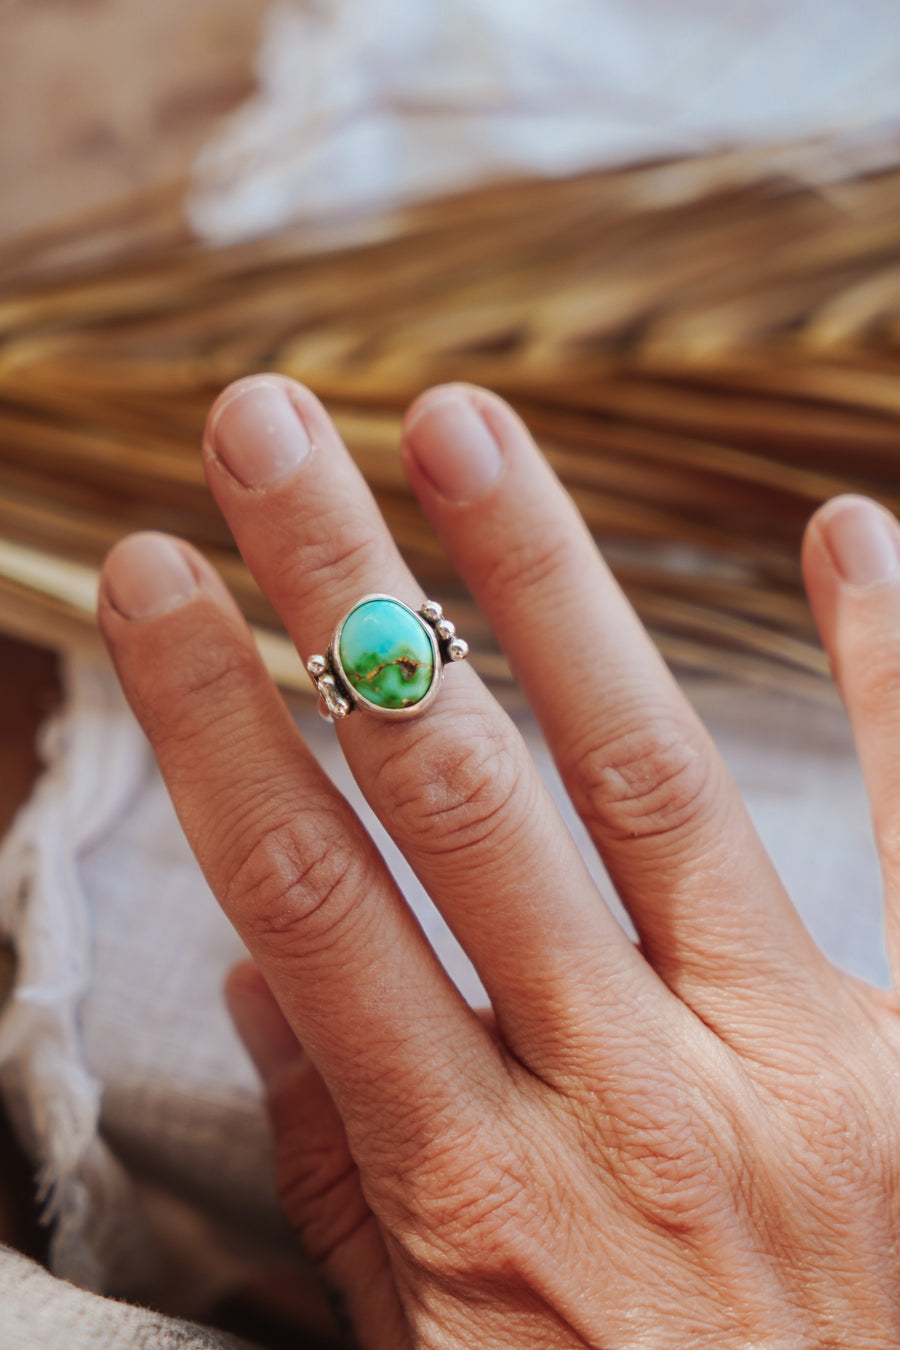 Ellipsis Ring in Sonoran Mountain Turquoise Size 5